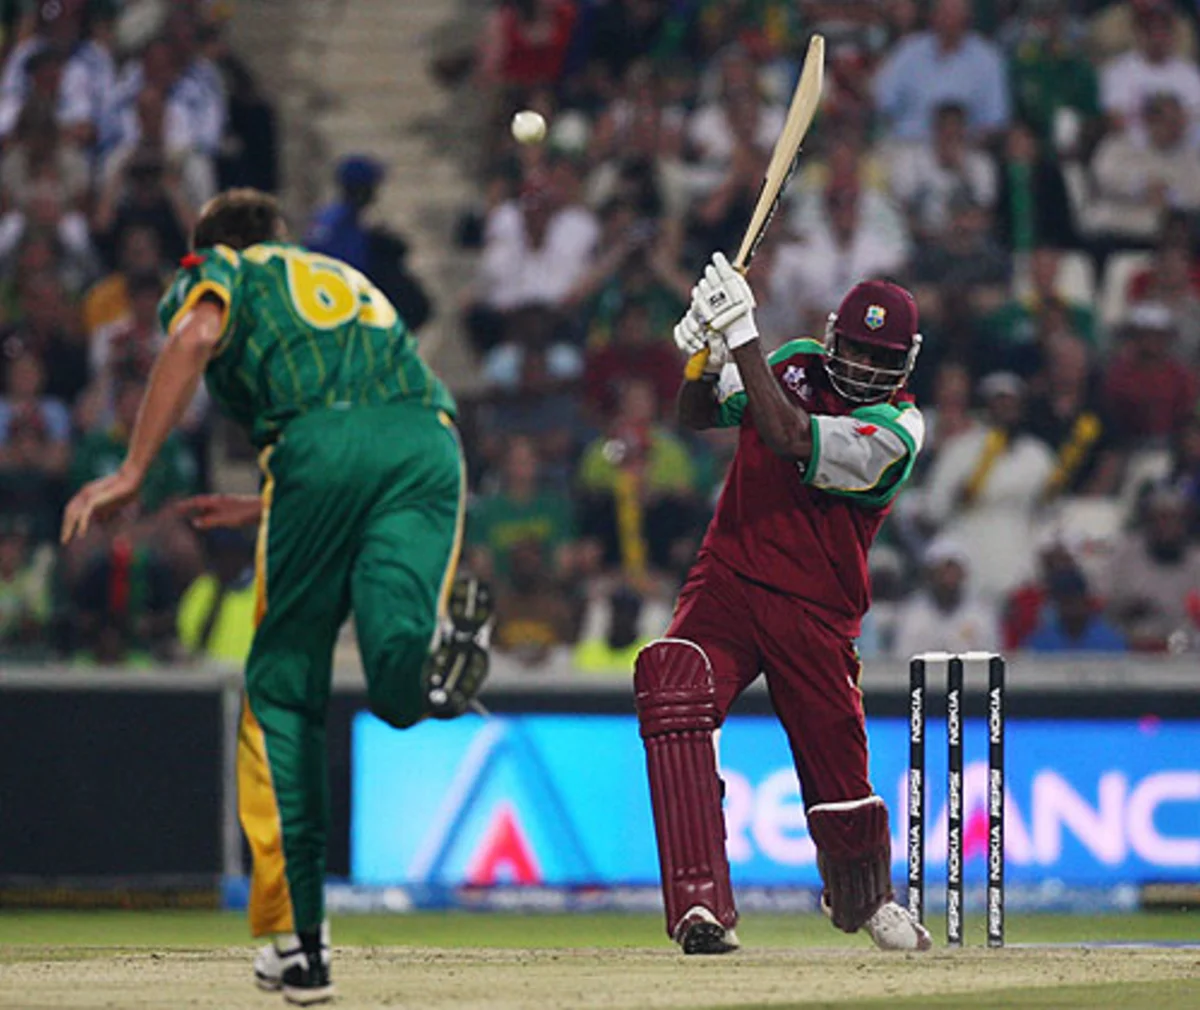 South Africa Vs West Indies-Eighth & Ninth Highest Total in T20 World Cup